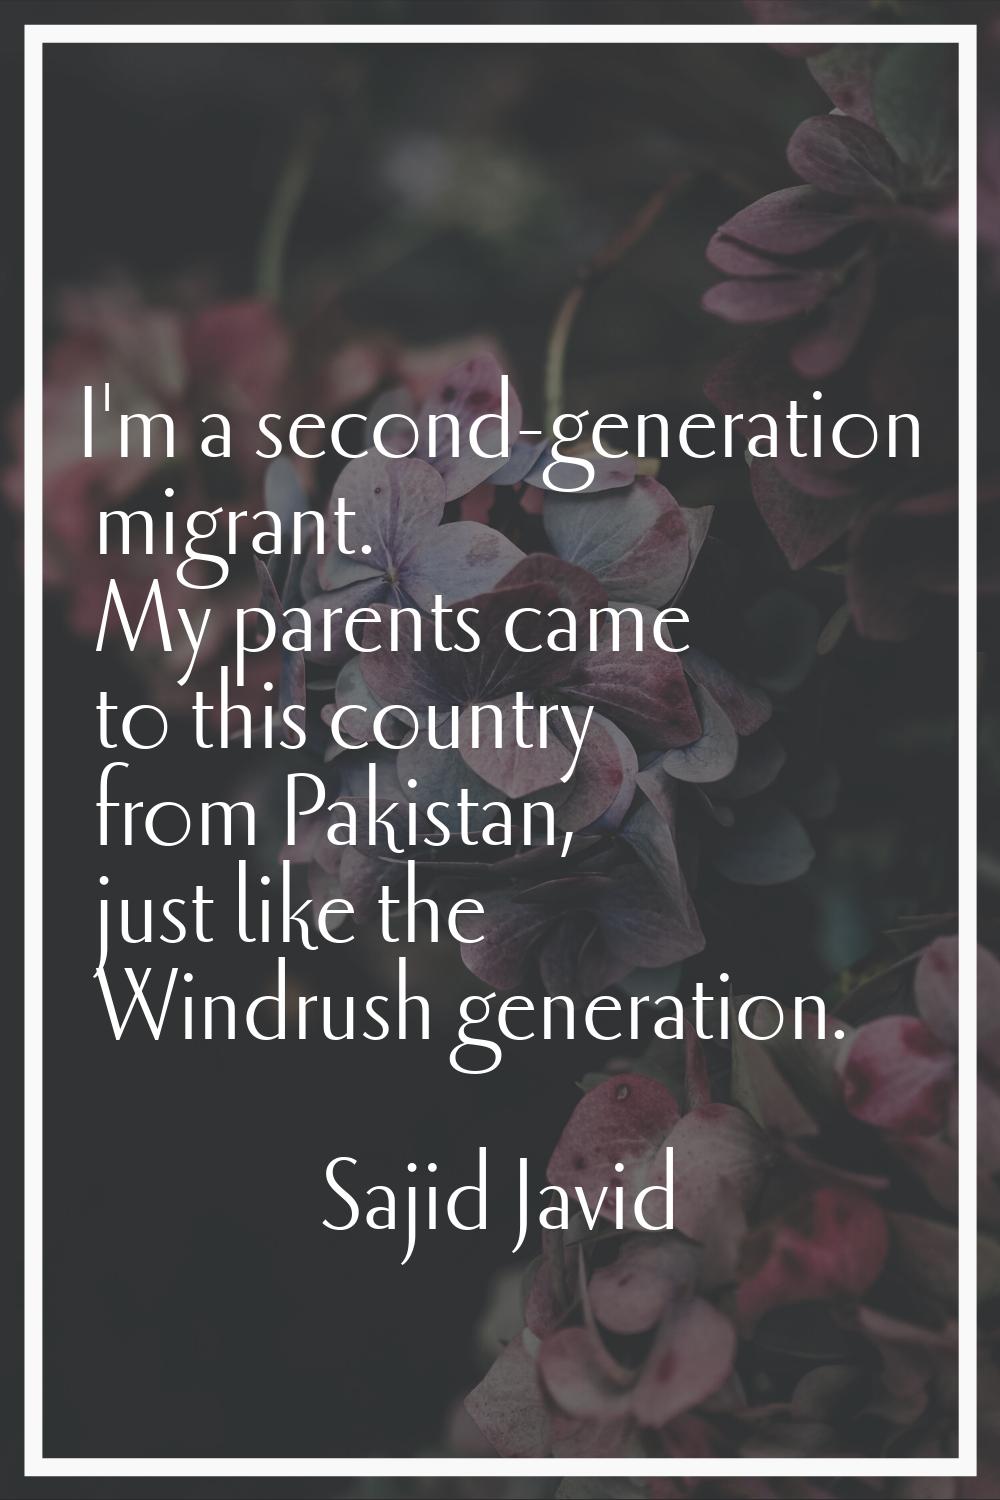 I'm a second-generation migrant. My parents came to this country from Pakistan, just like the Windr